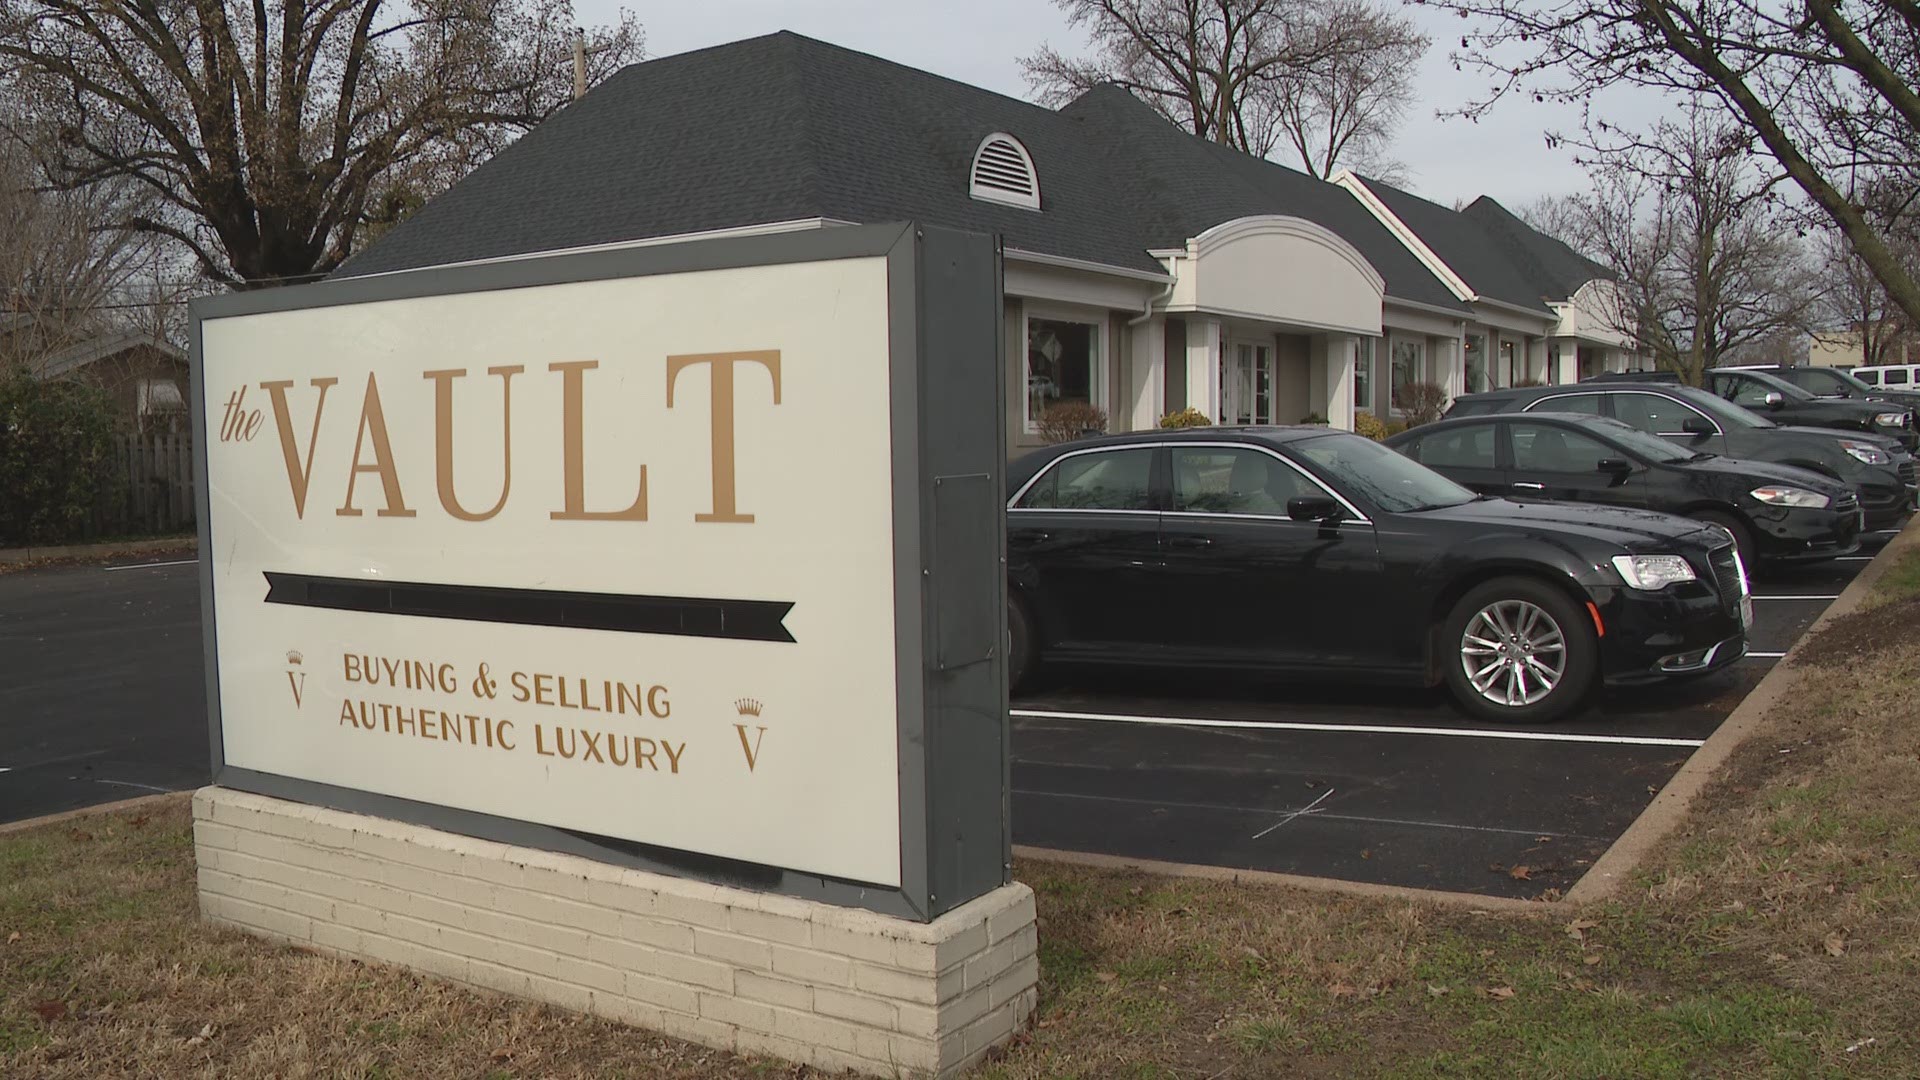 A luxury resale business in Brentwood was broken into following the busy holiday weekend